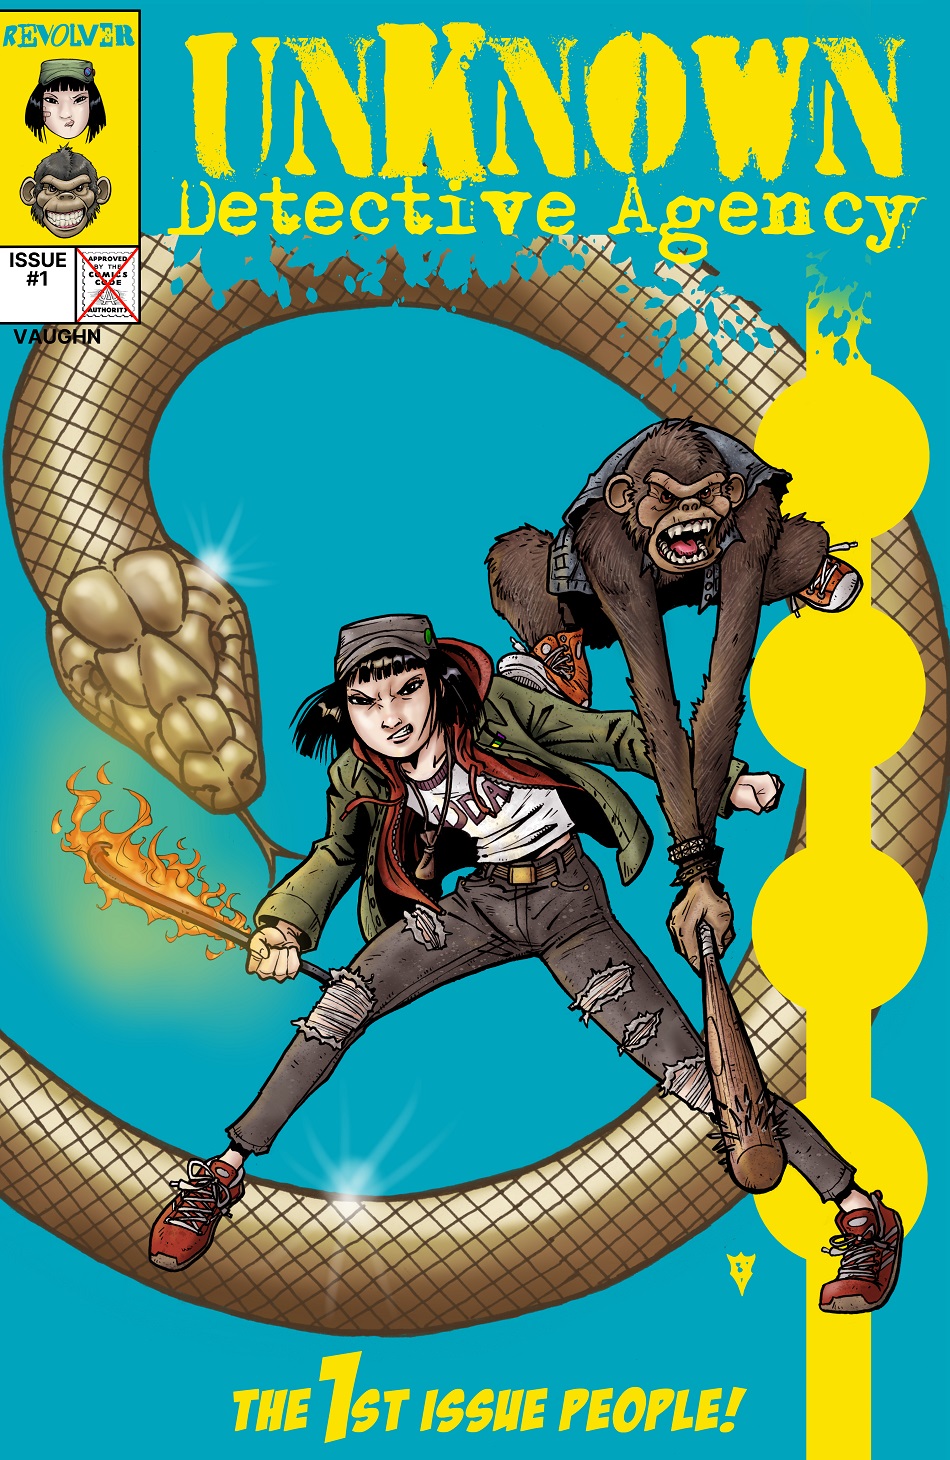 U.D.A.issue 1 cover